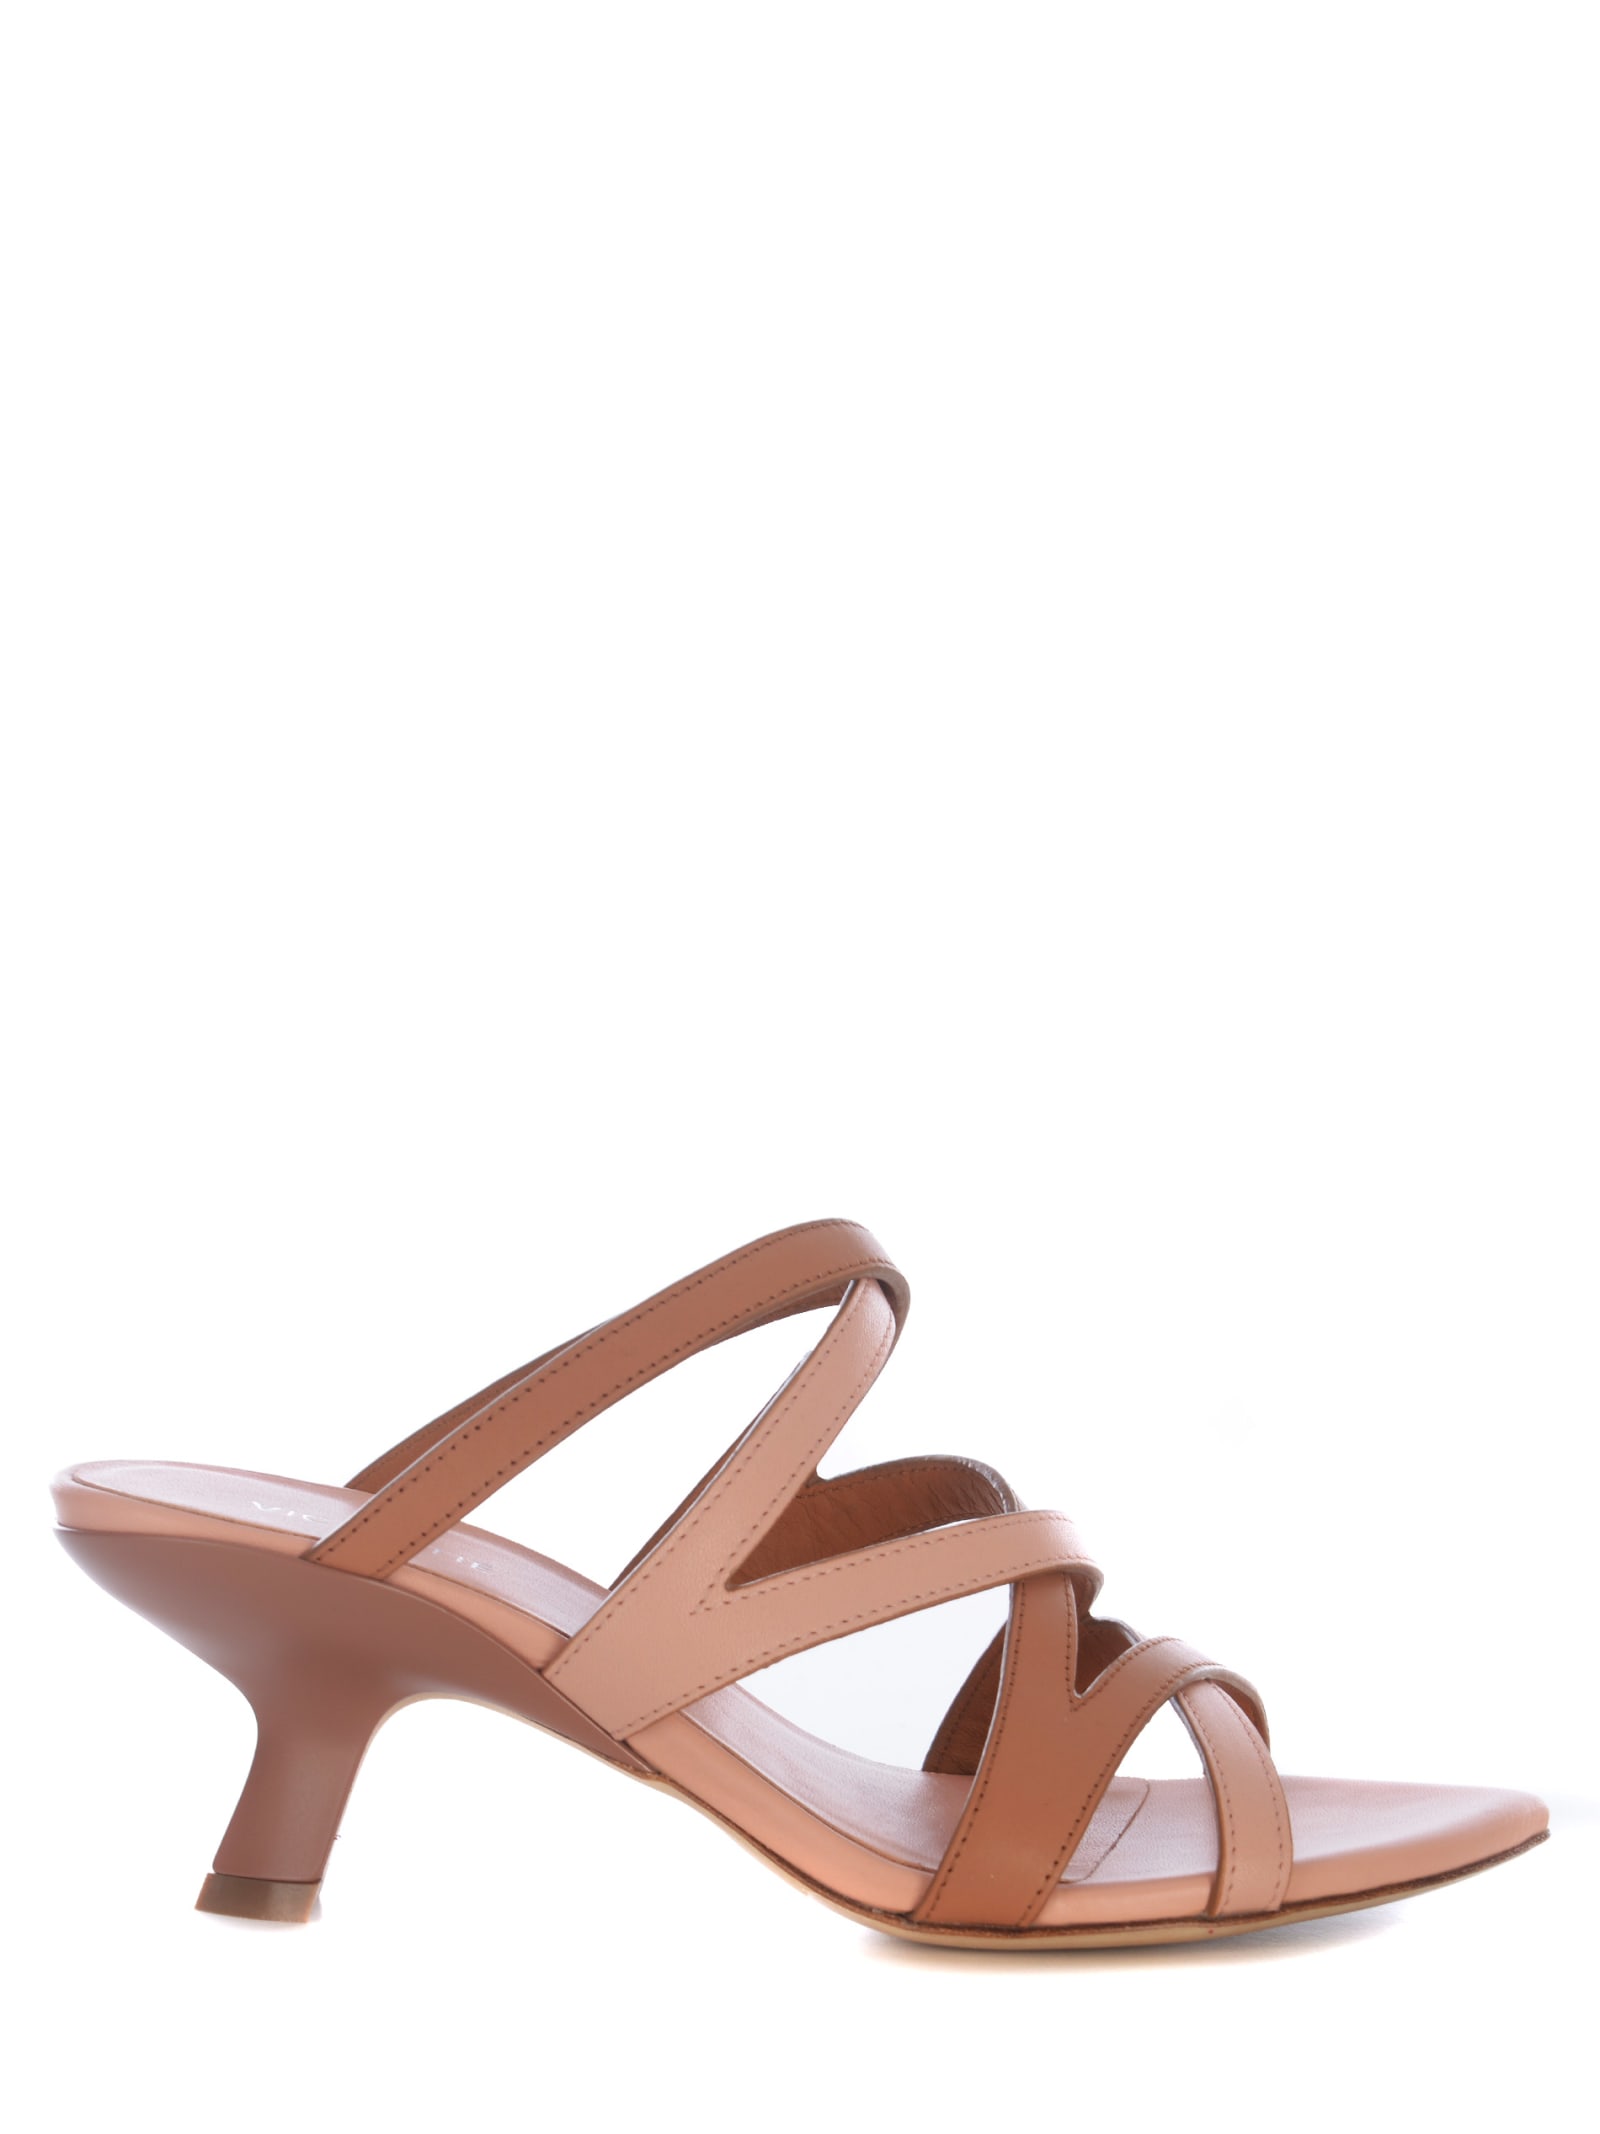 Shop Vic Matie Sandal Vic Matié Slash Made Of Leather In Cuoio